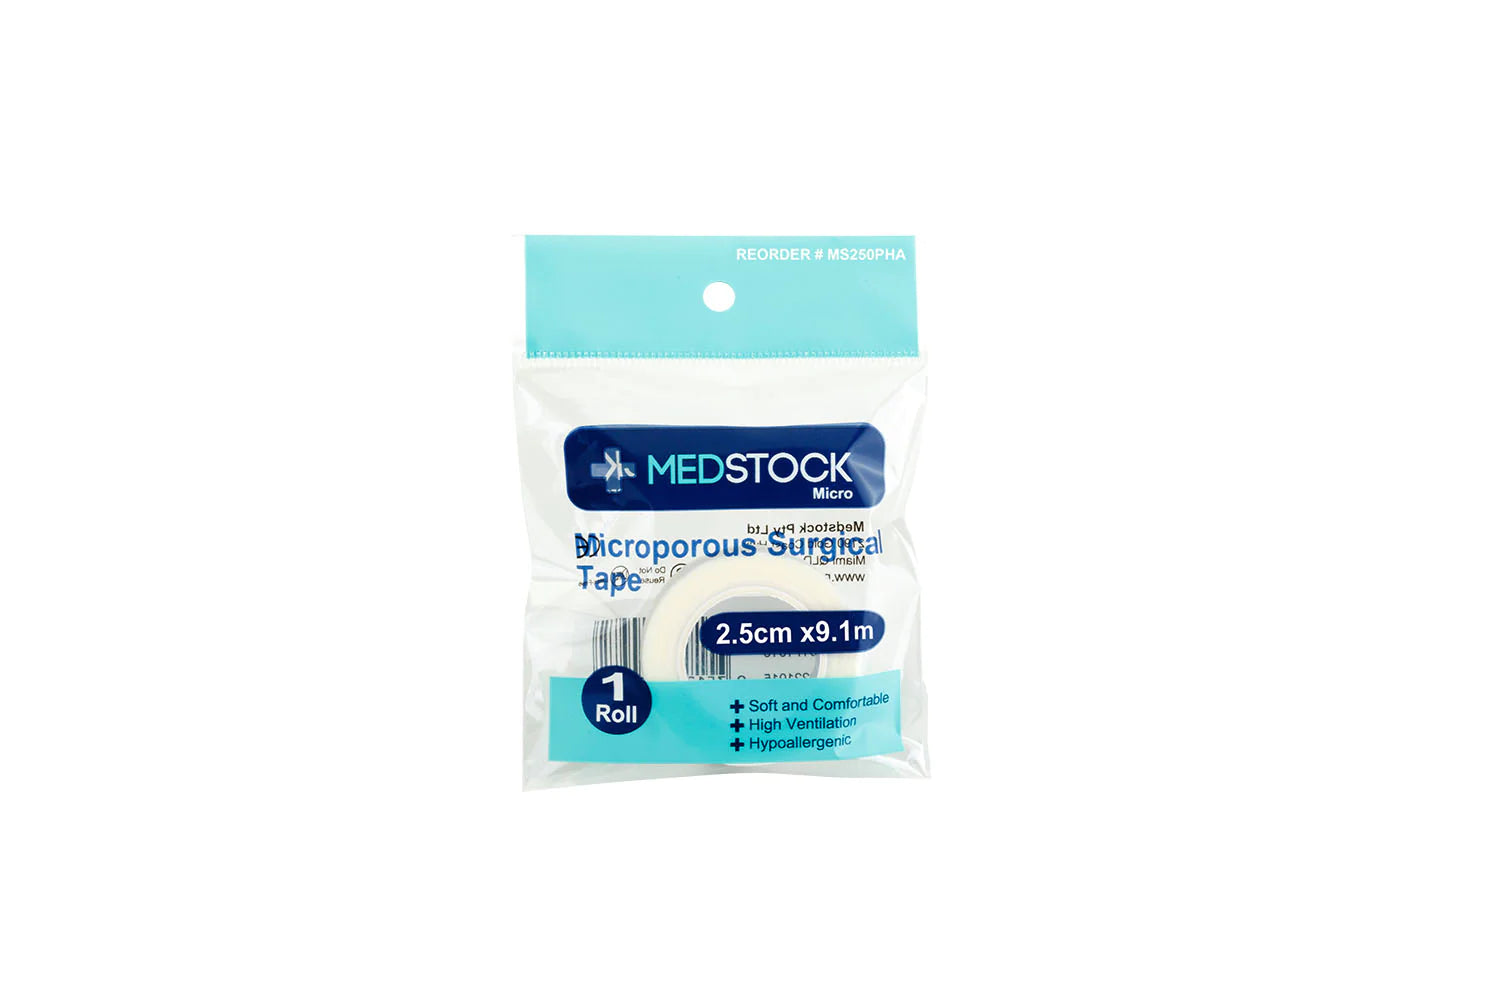 Medstock Microporous Surgical Tape -Box of 24